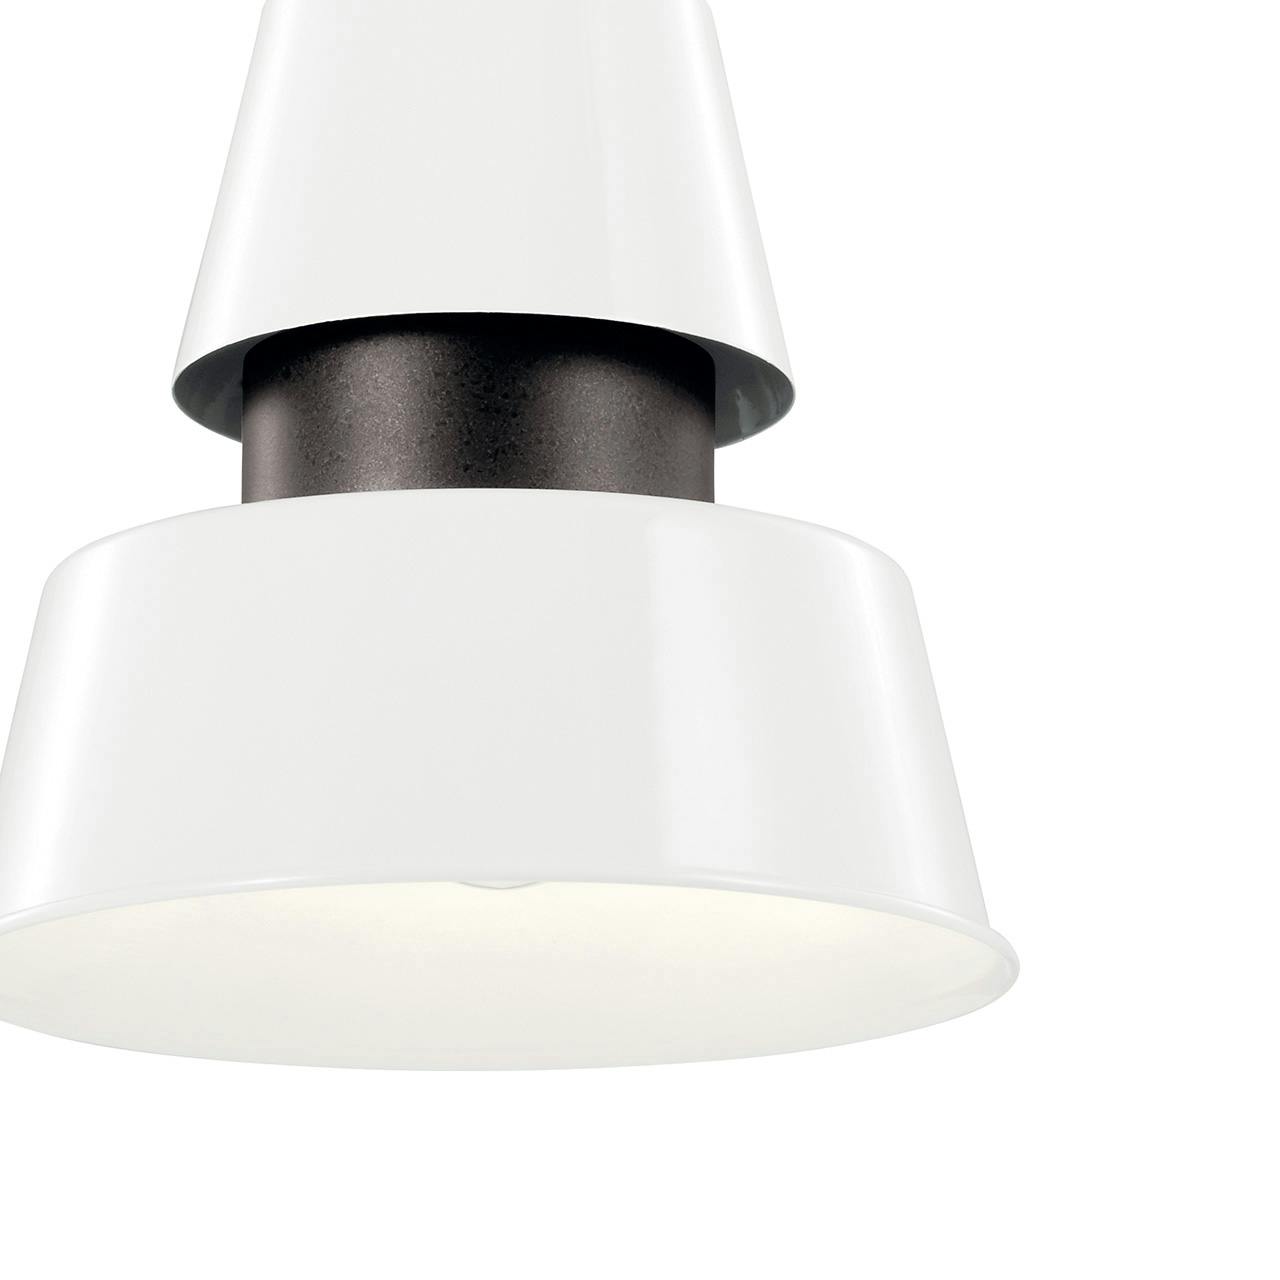 Close up view of the Lozano 9.5" 1 Light Pendant White on a white background